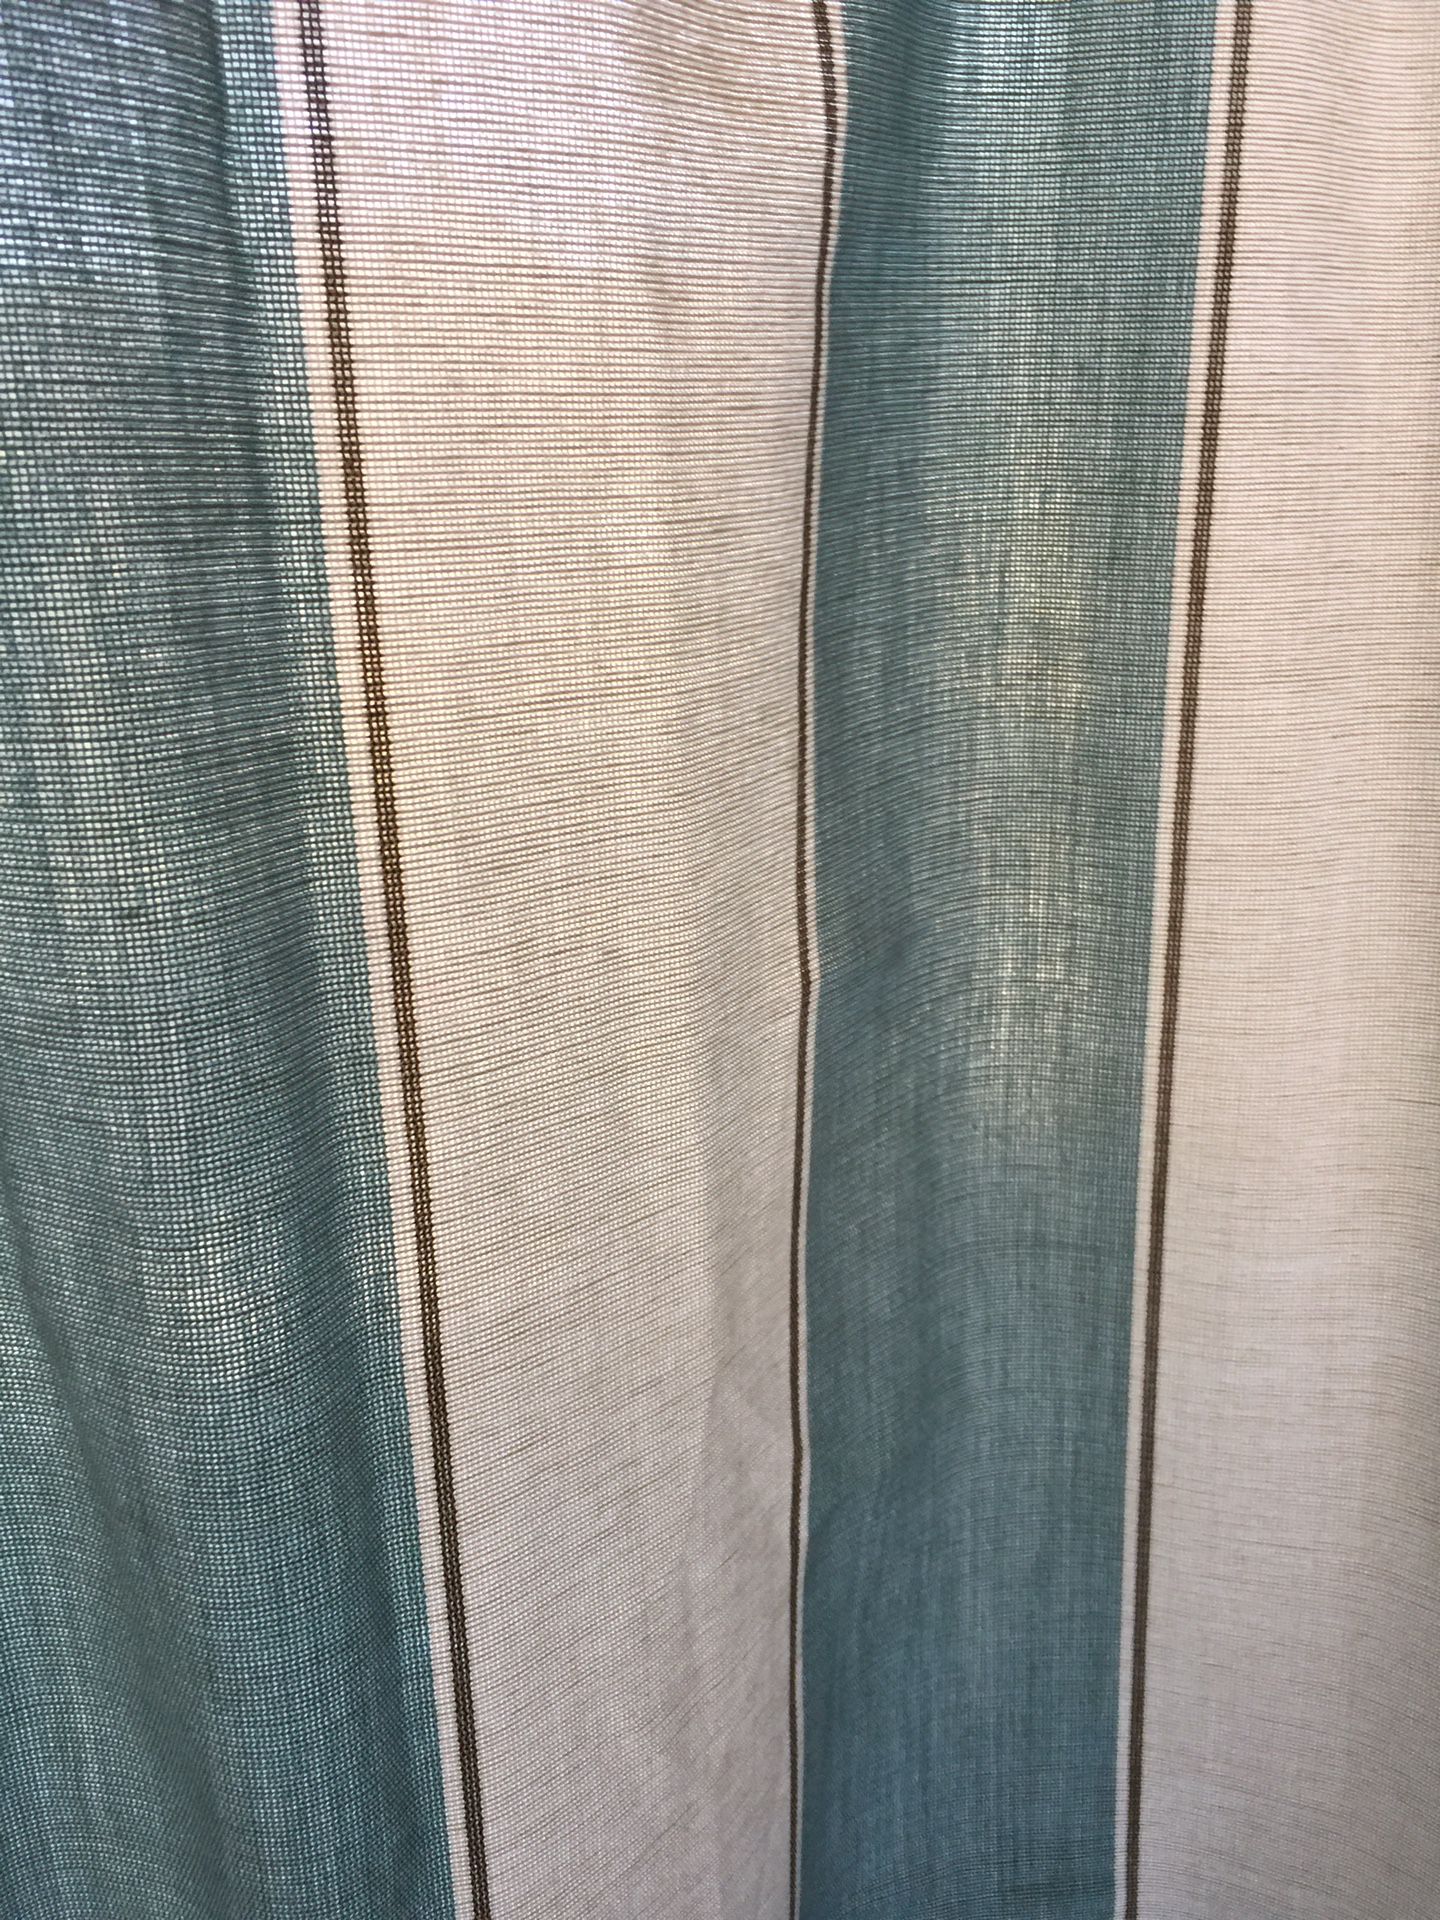 Set of 6 Stripe Drapes White and Soft Teal 55”W x84”L 10$ For one